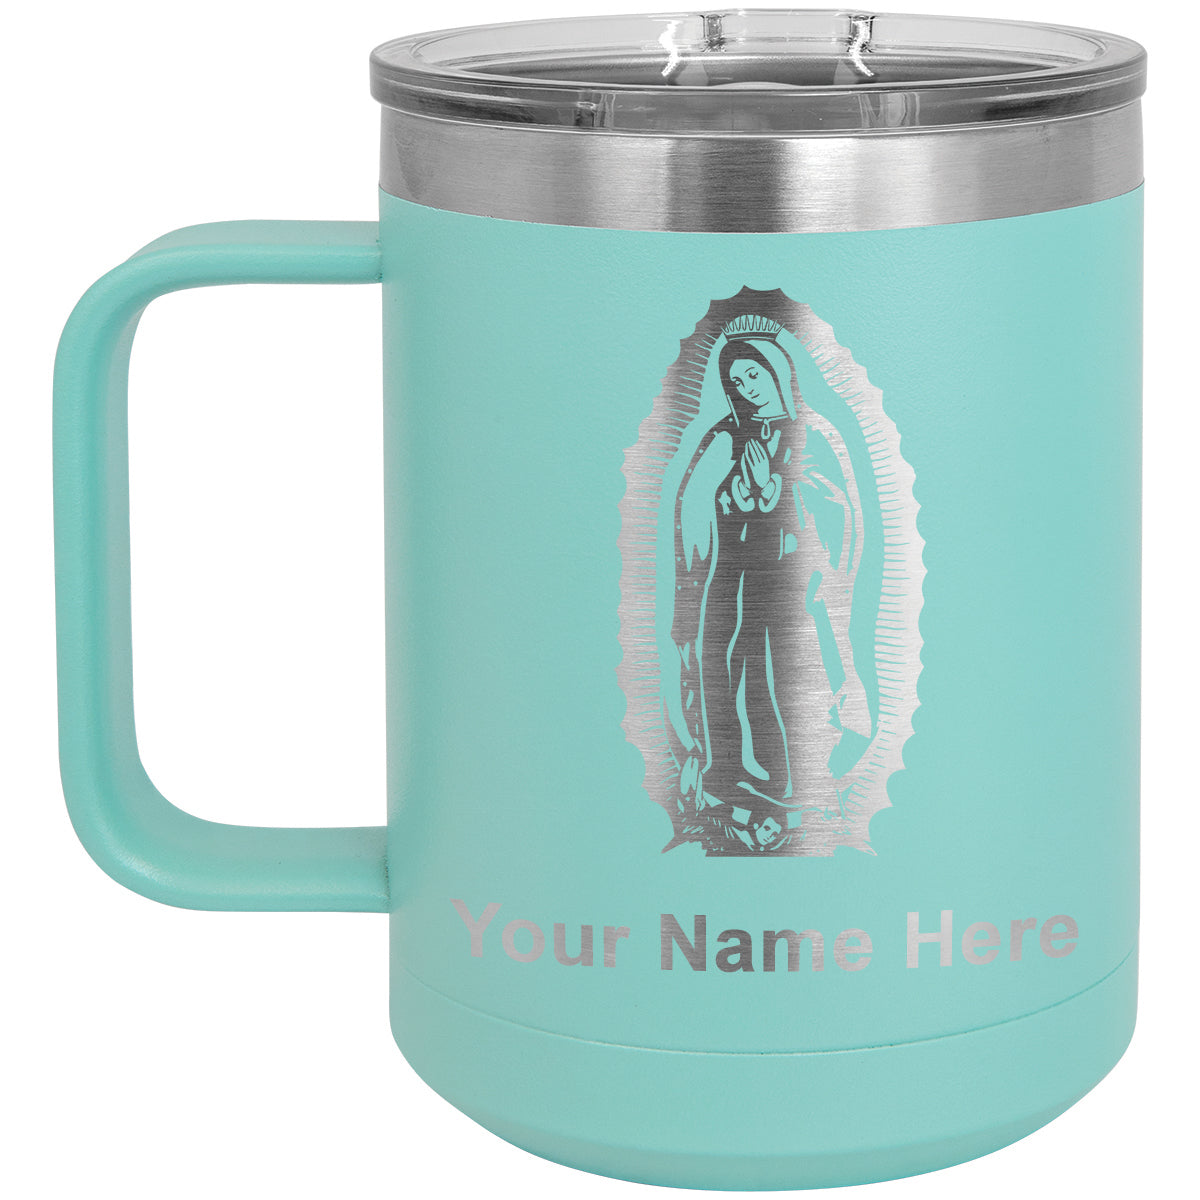 15oz Vacuum Insulated Coffee Mug, Virgen de Guadalupe, Personalized Engraving Included